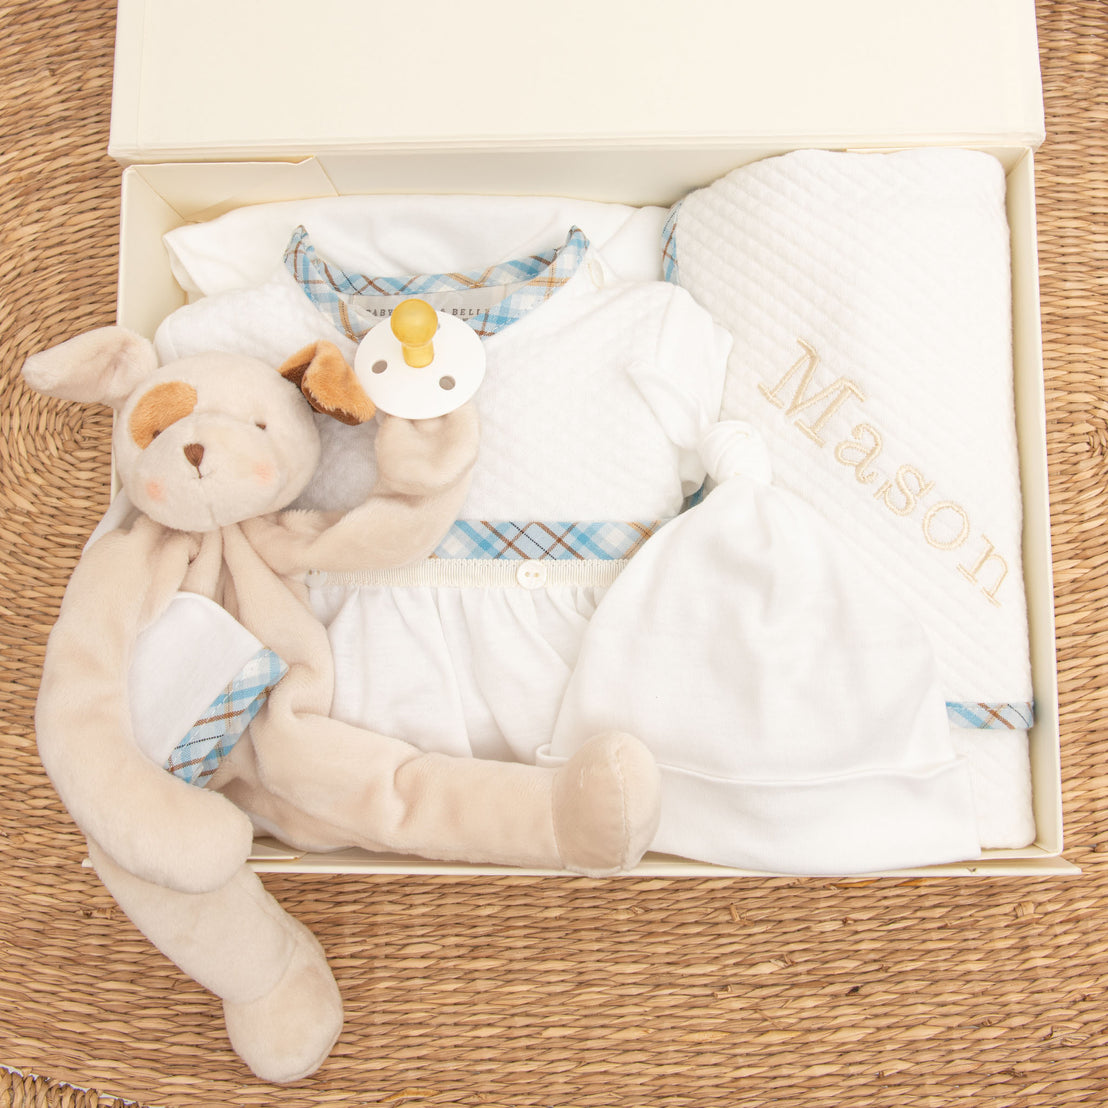 An upscale Mason Newborn Gift Set containing a plush bunny, a pacifier, a white onesie with plaid detailing, and a personalized heirloom white personalized blanket embroidered with the name "Mason".